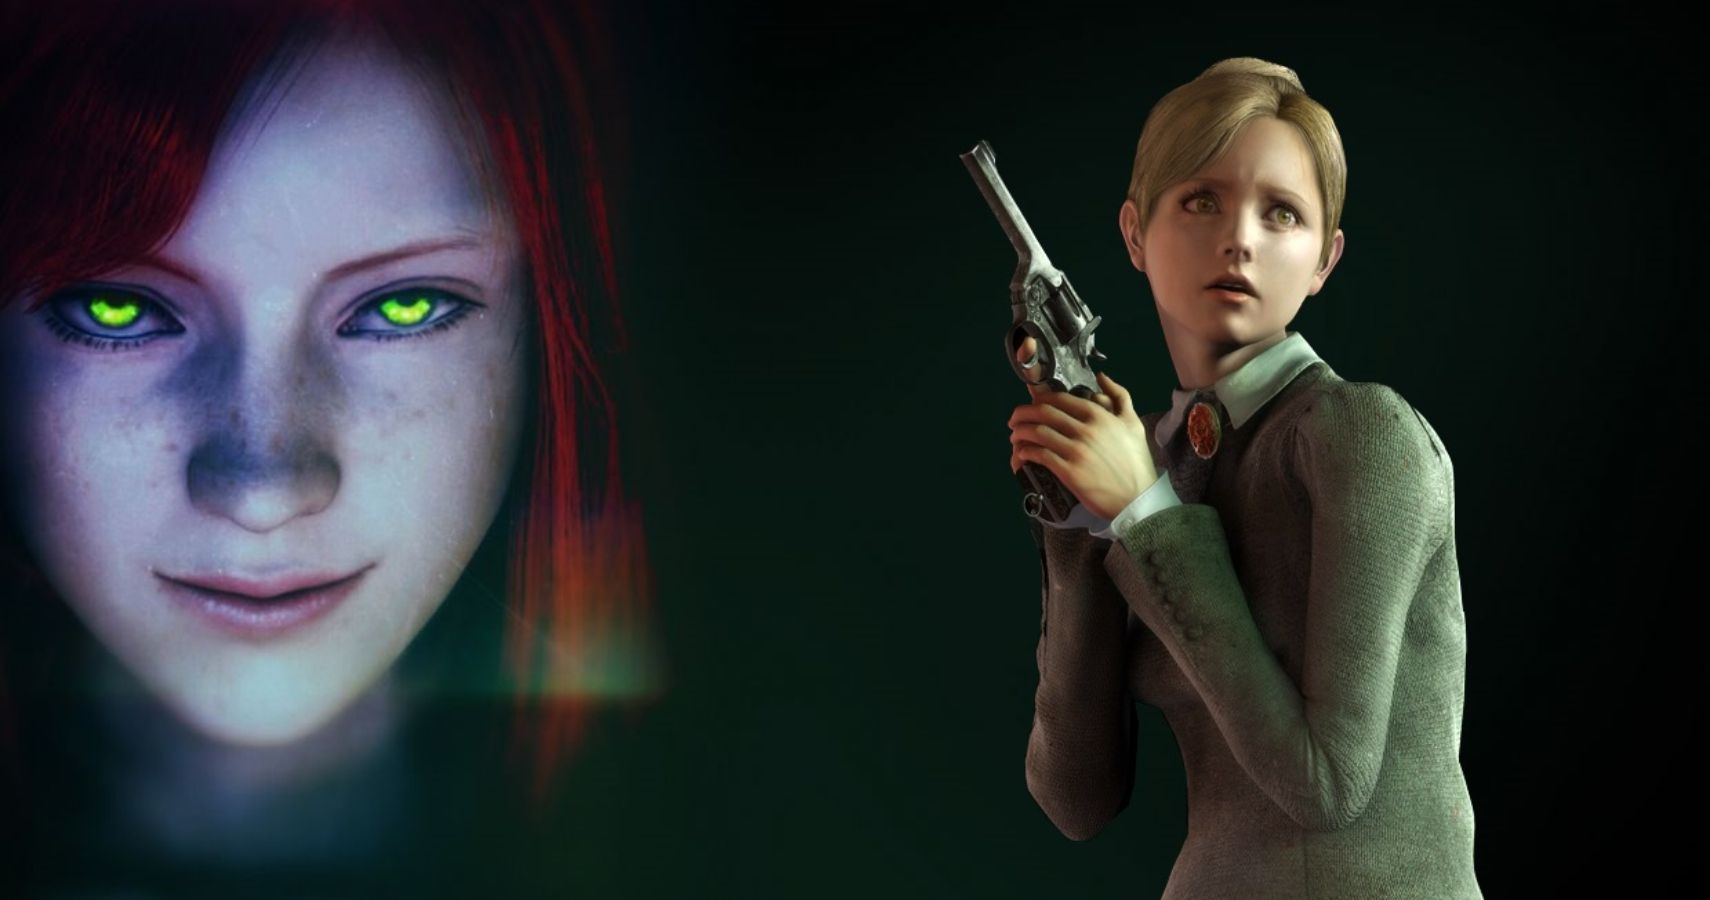 Remembering Rule Of Rose, The Game Too Scary For The West